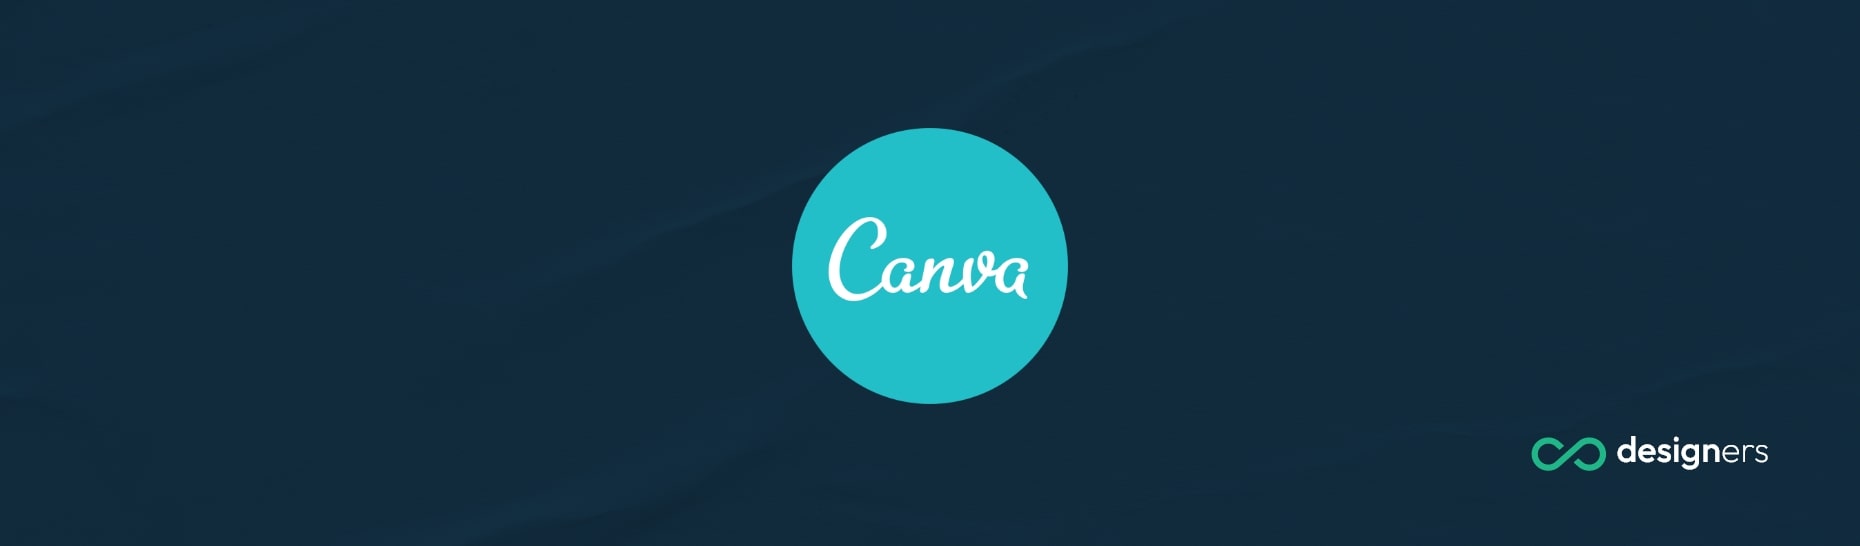 How Do I Embed a YouTube Video in Canva Presentation?